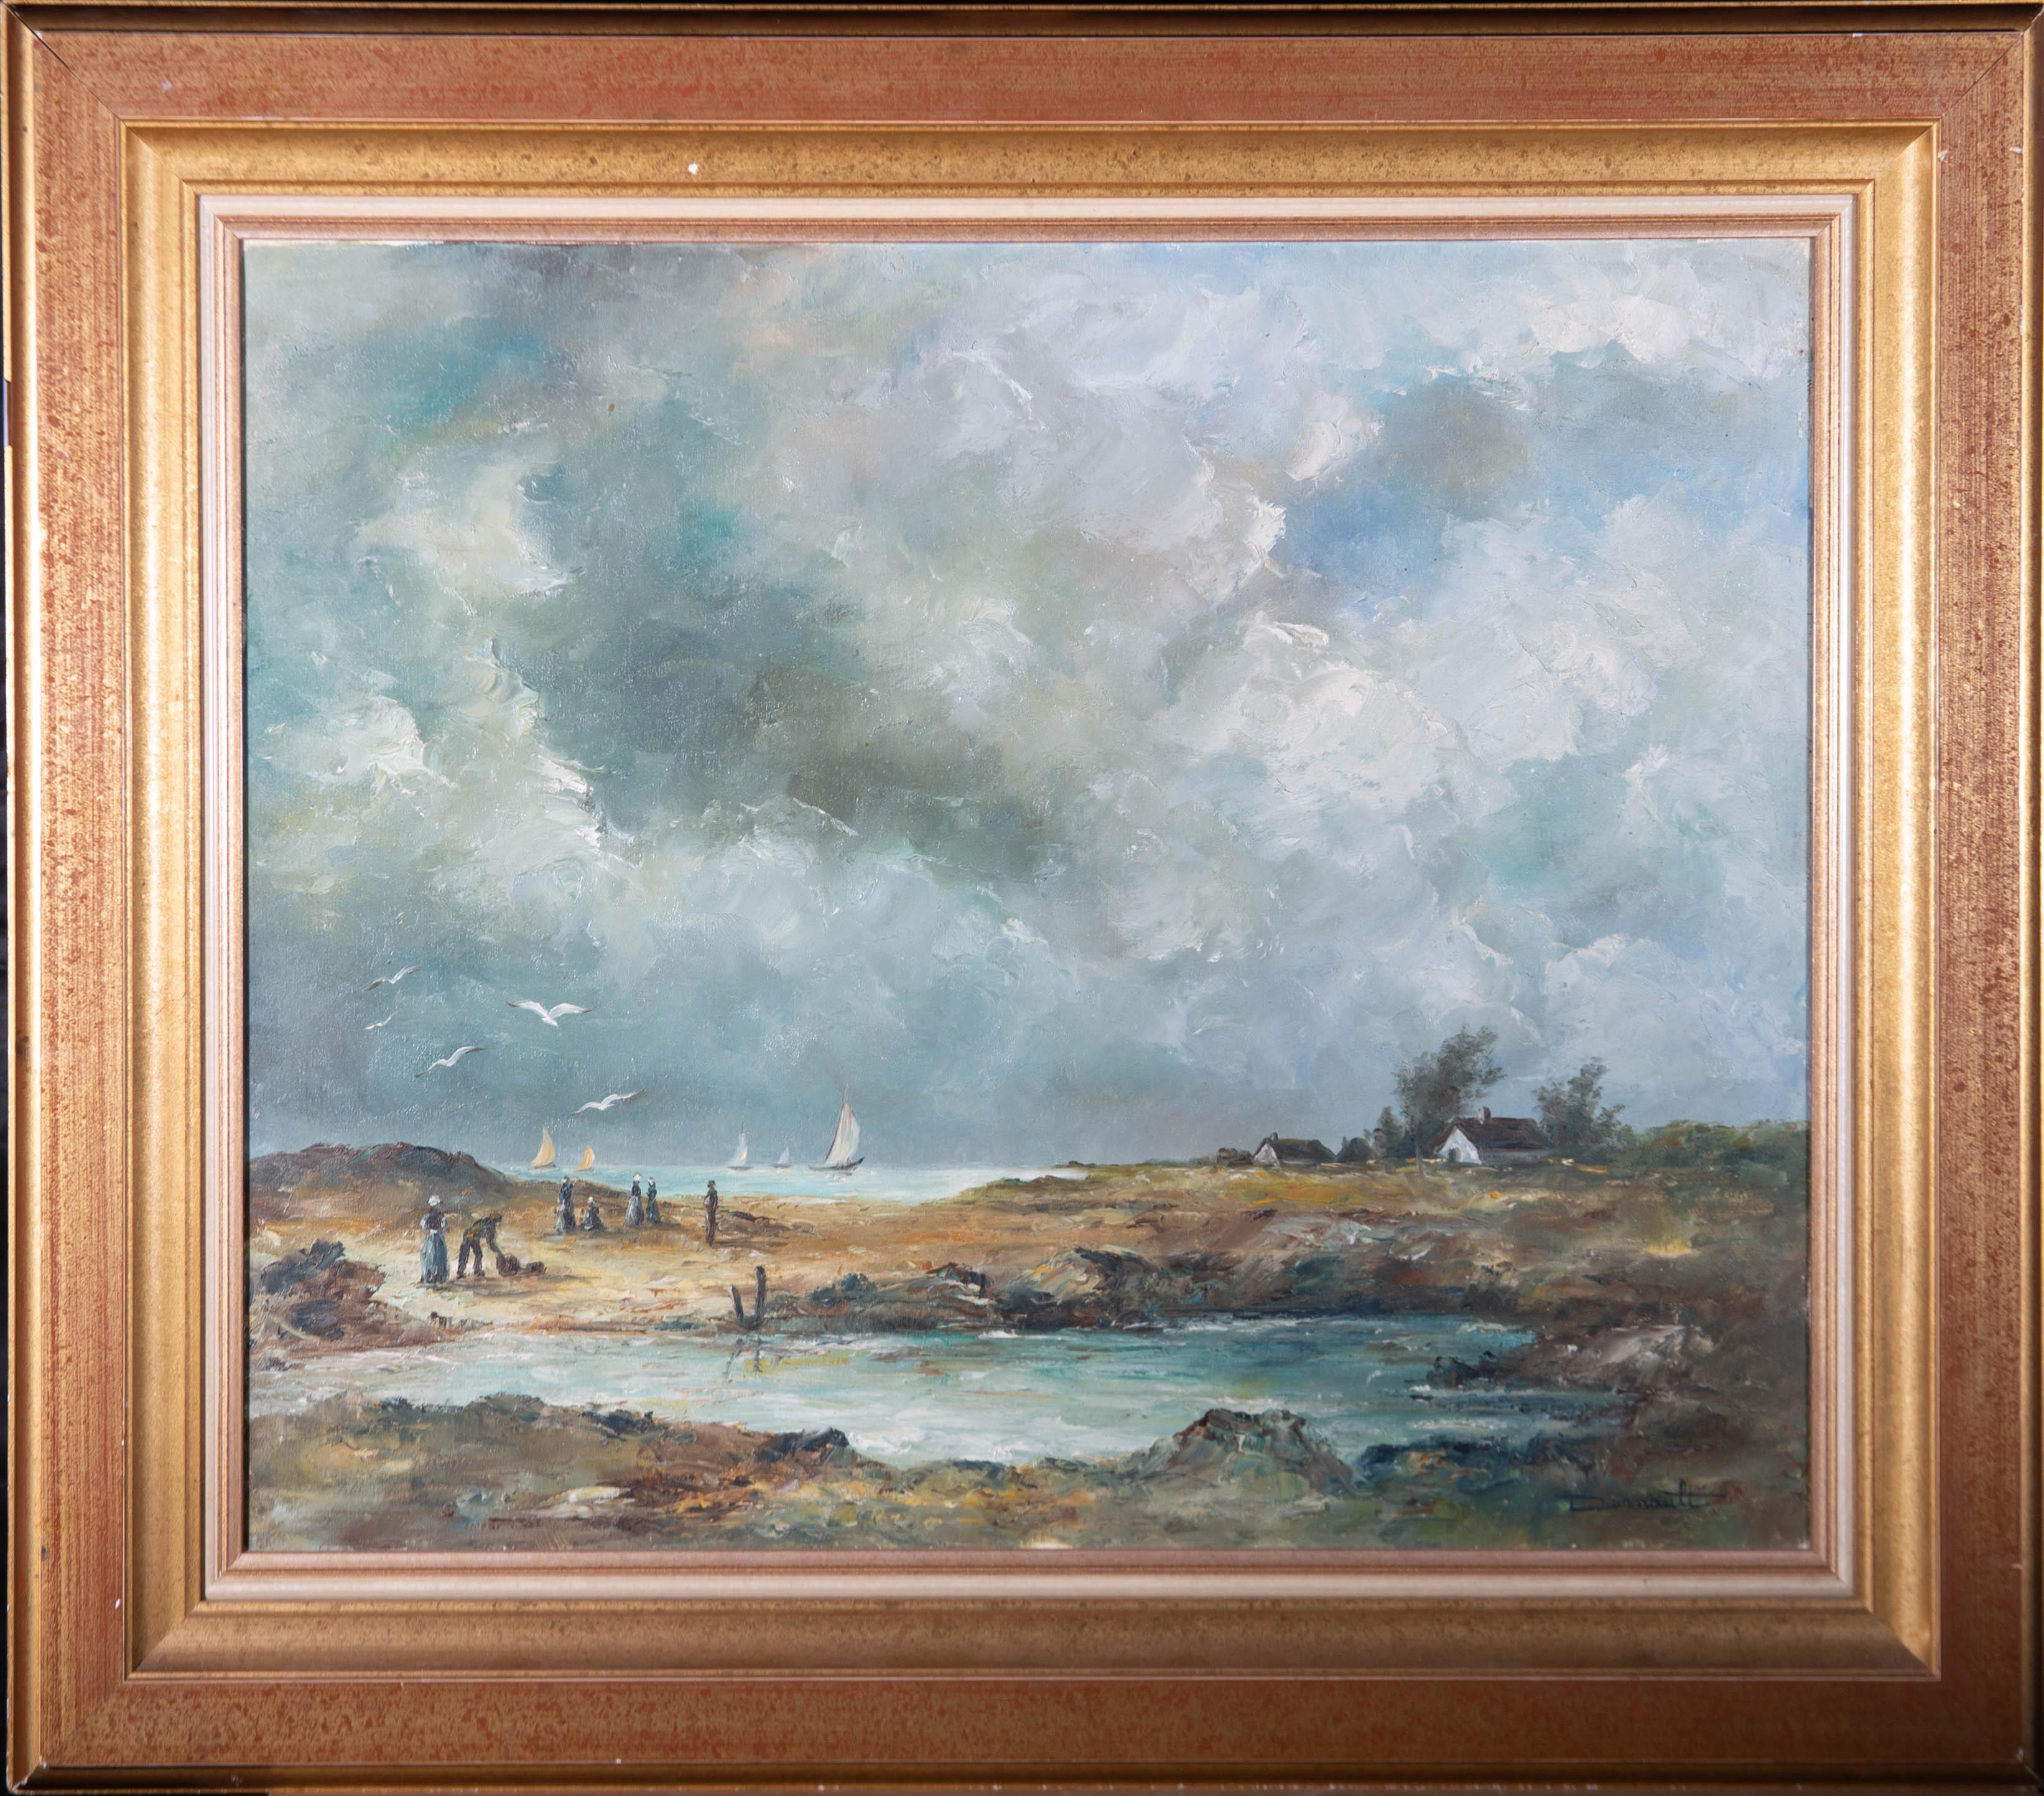 An atmospheric view of storm clouds circling above sailing boats on the coast. Figures can be seen gathered to the lower-left corner of the composition. Presented in a distressed gilt-effect wooden frame. Signed to the lower-right edge. On canvas on